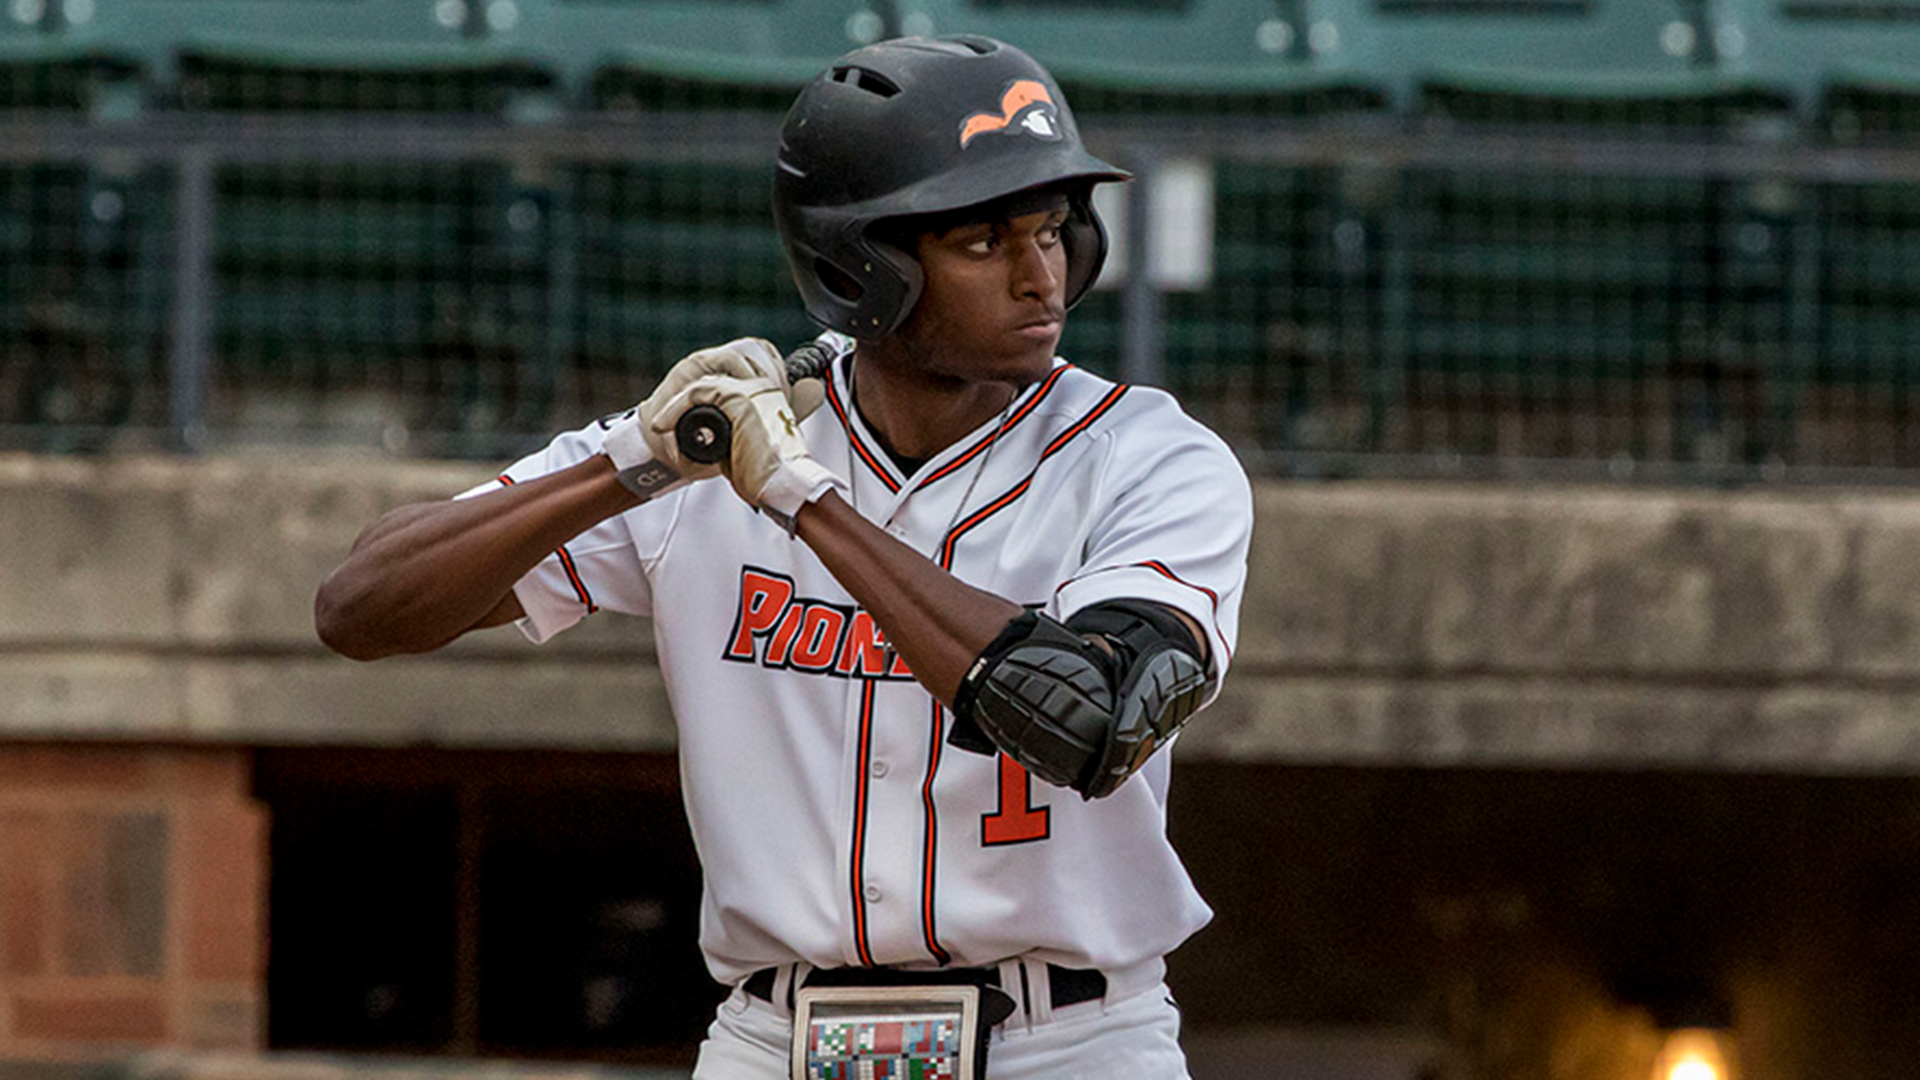 Tusculum errors prove costly in 10-9 road loss at Coker